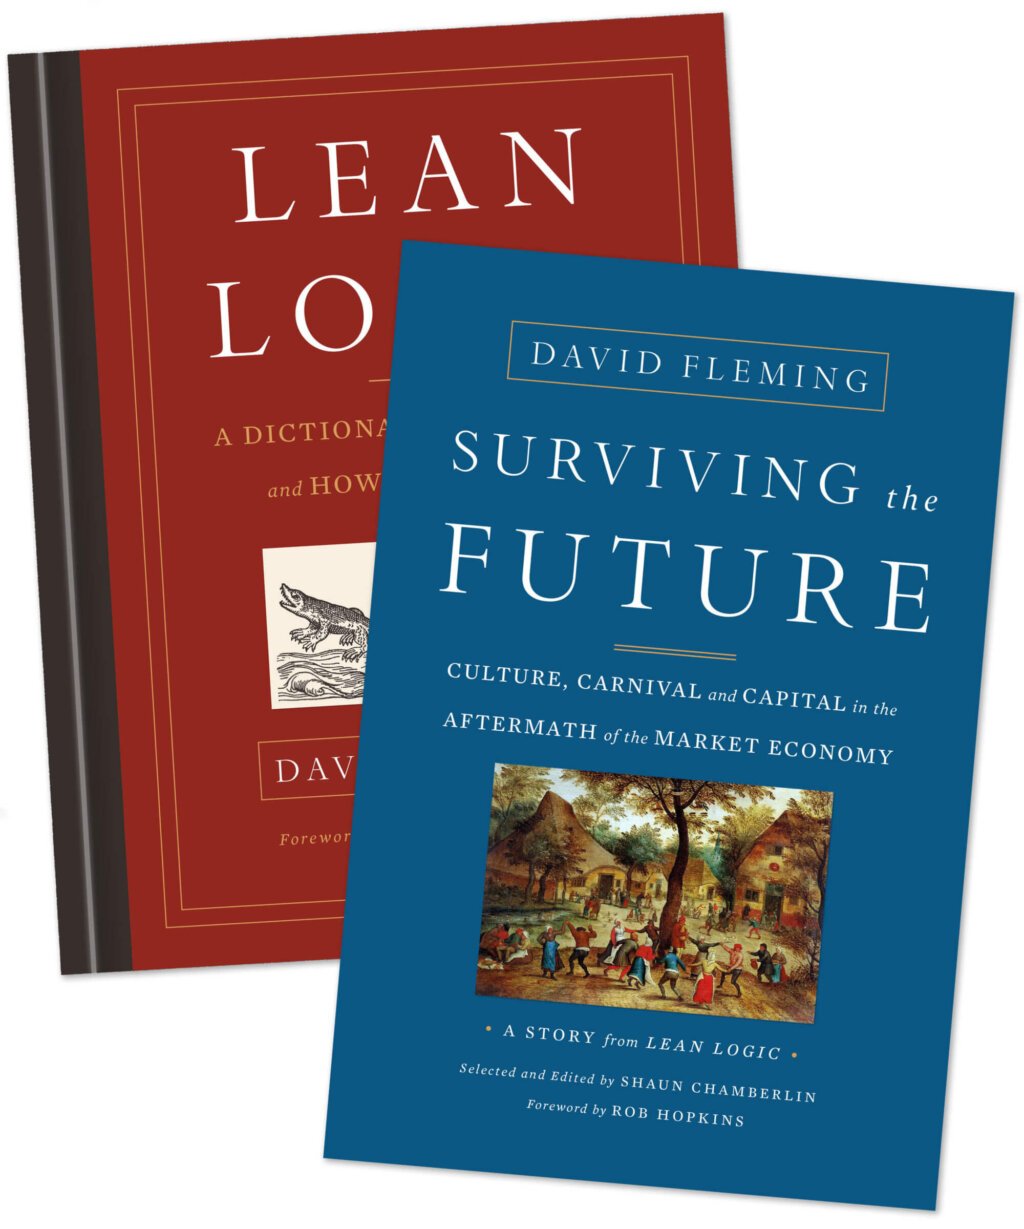 lean logic and surviving the future